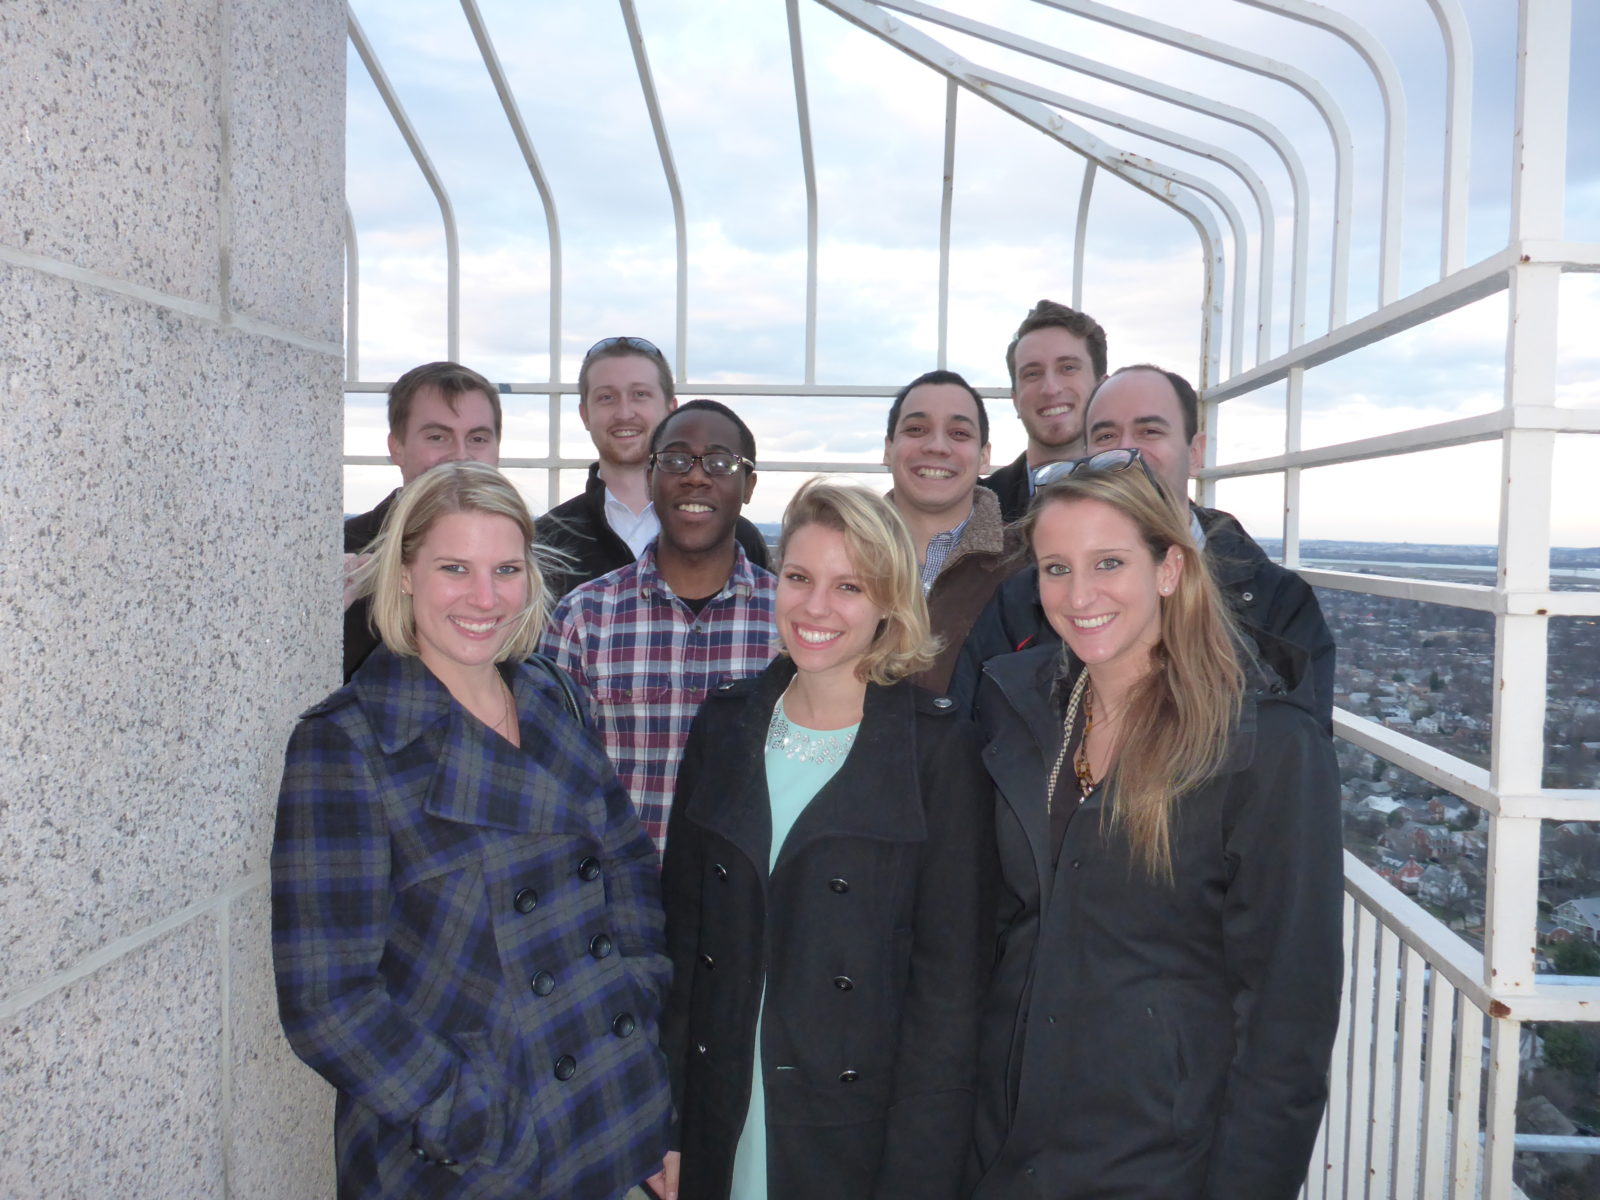 The 2016 TFAS Public Policy Fellows pause for a photo at the top of the observation tower at the George Washington Masonic National Memorial during their 2016 winter retreat.